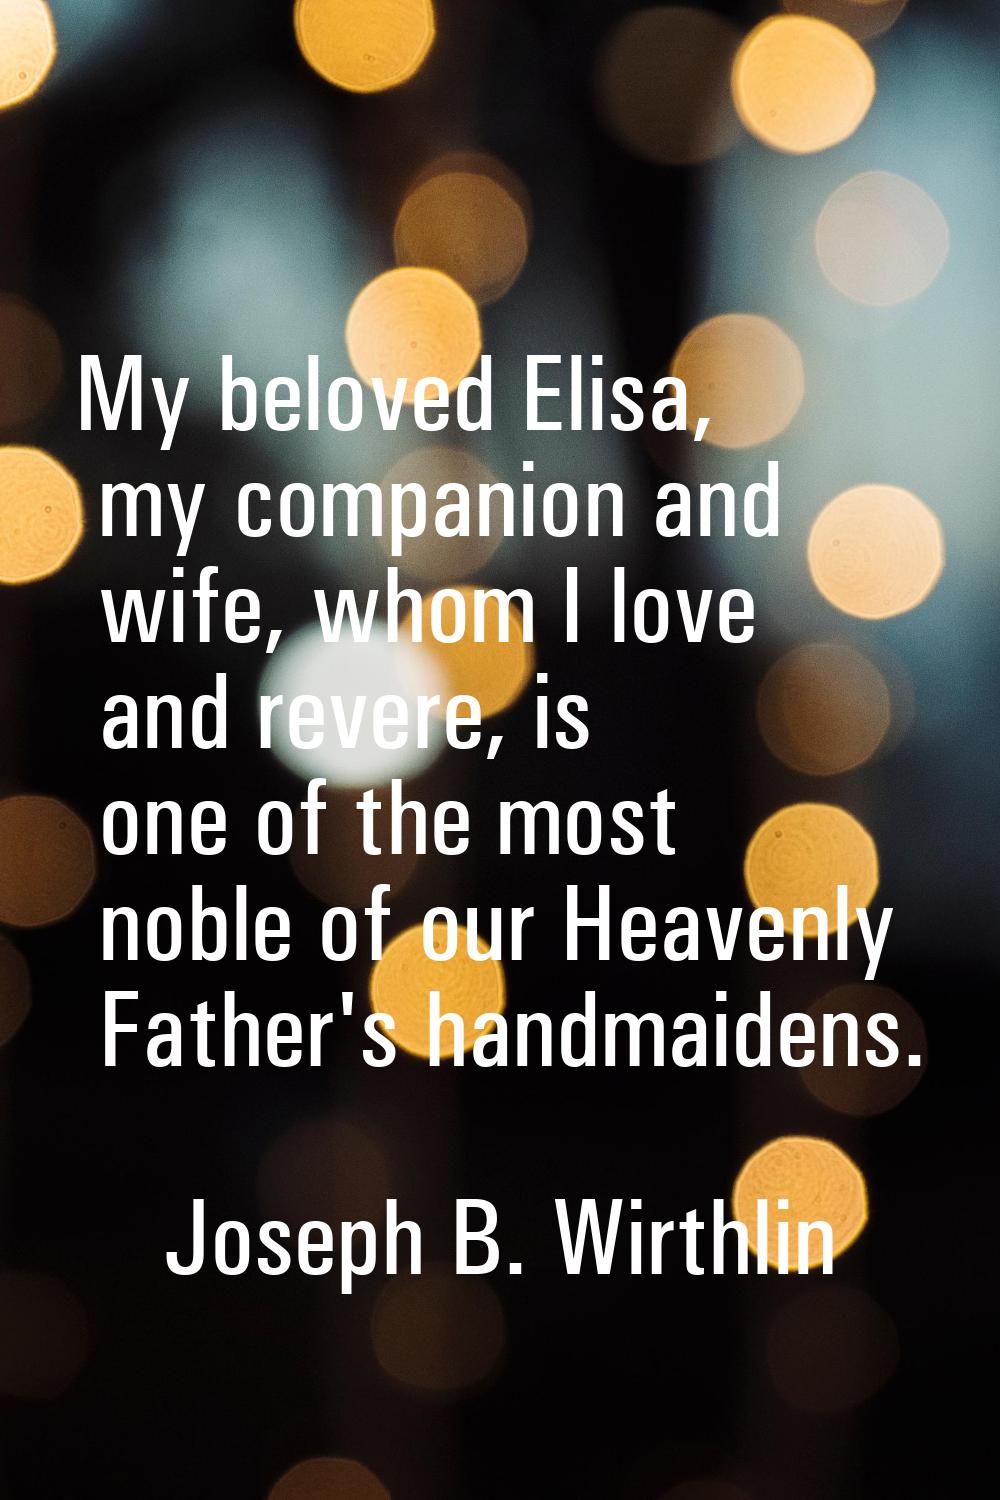 My beloved Elisa, my companion and wife, whom I love and revere, is one of the most noble of our He